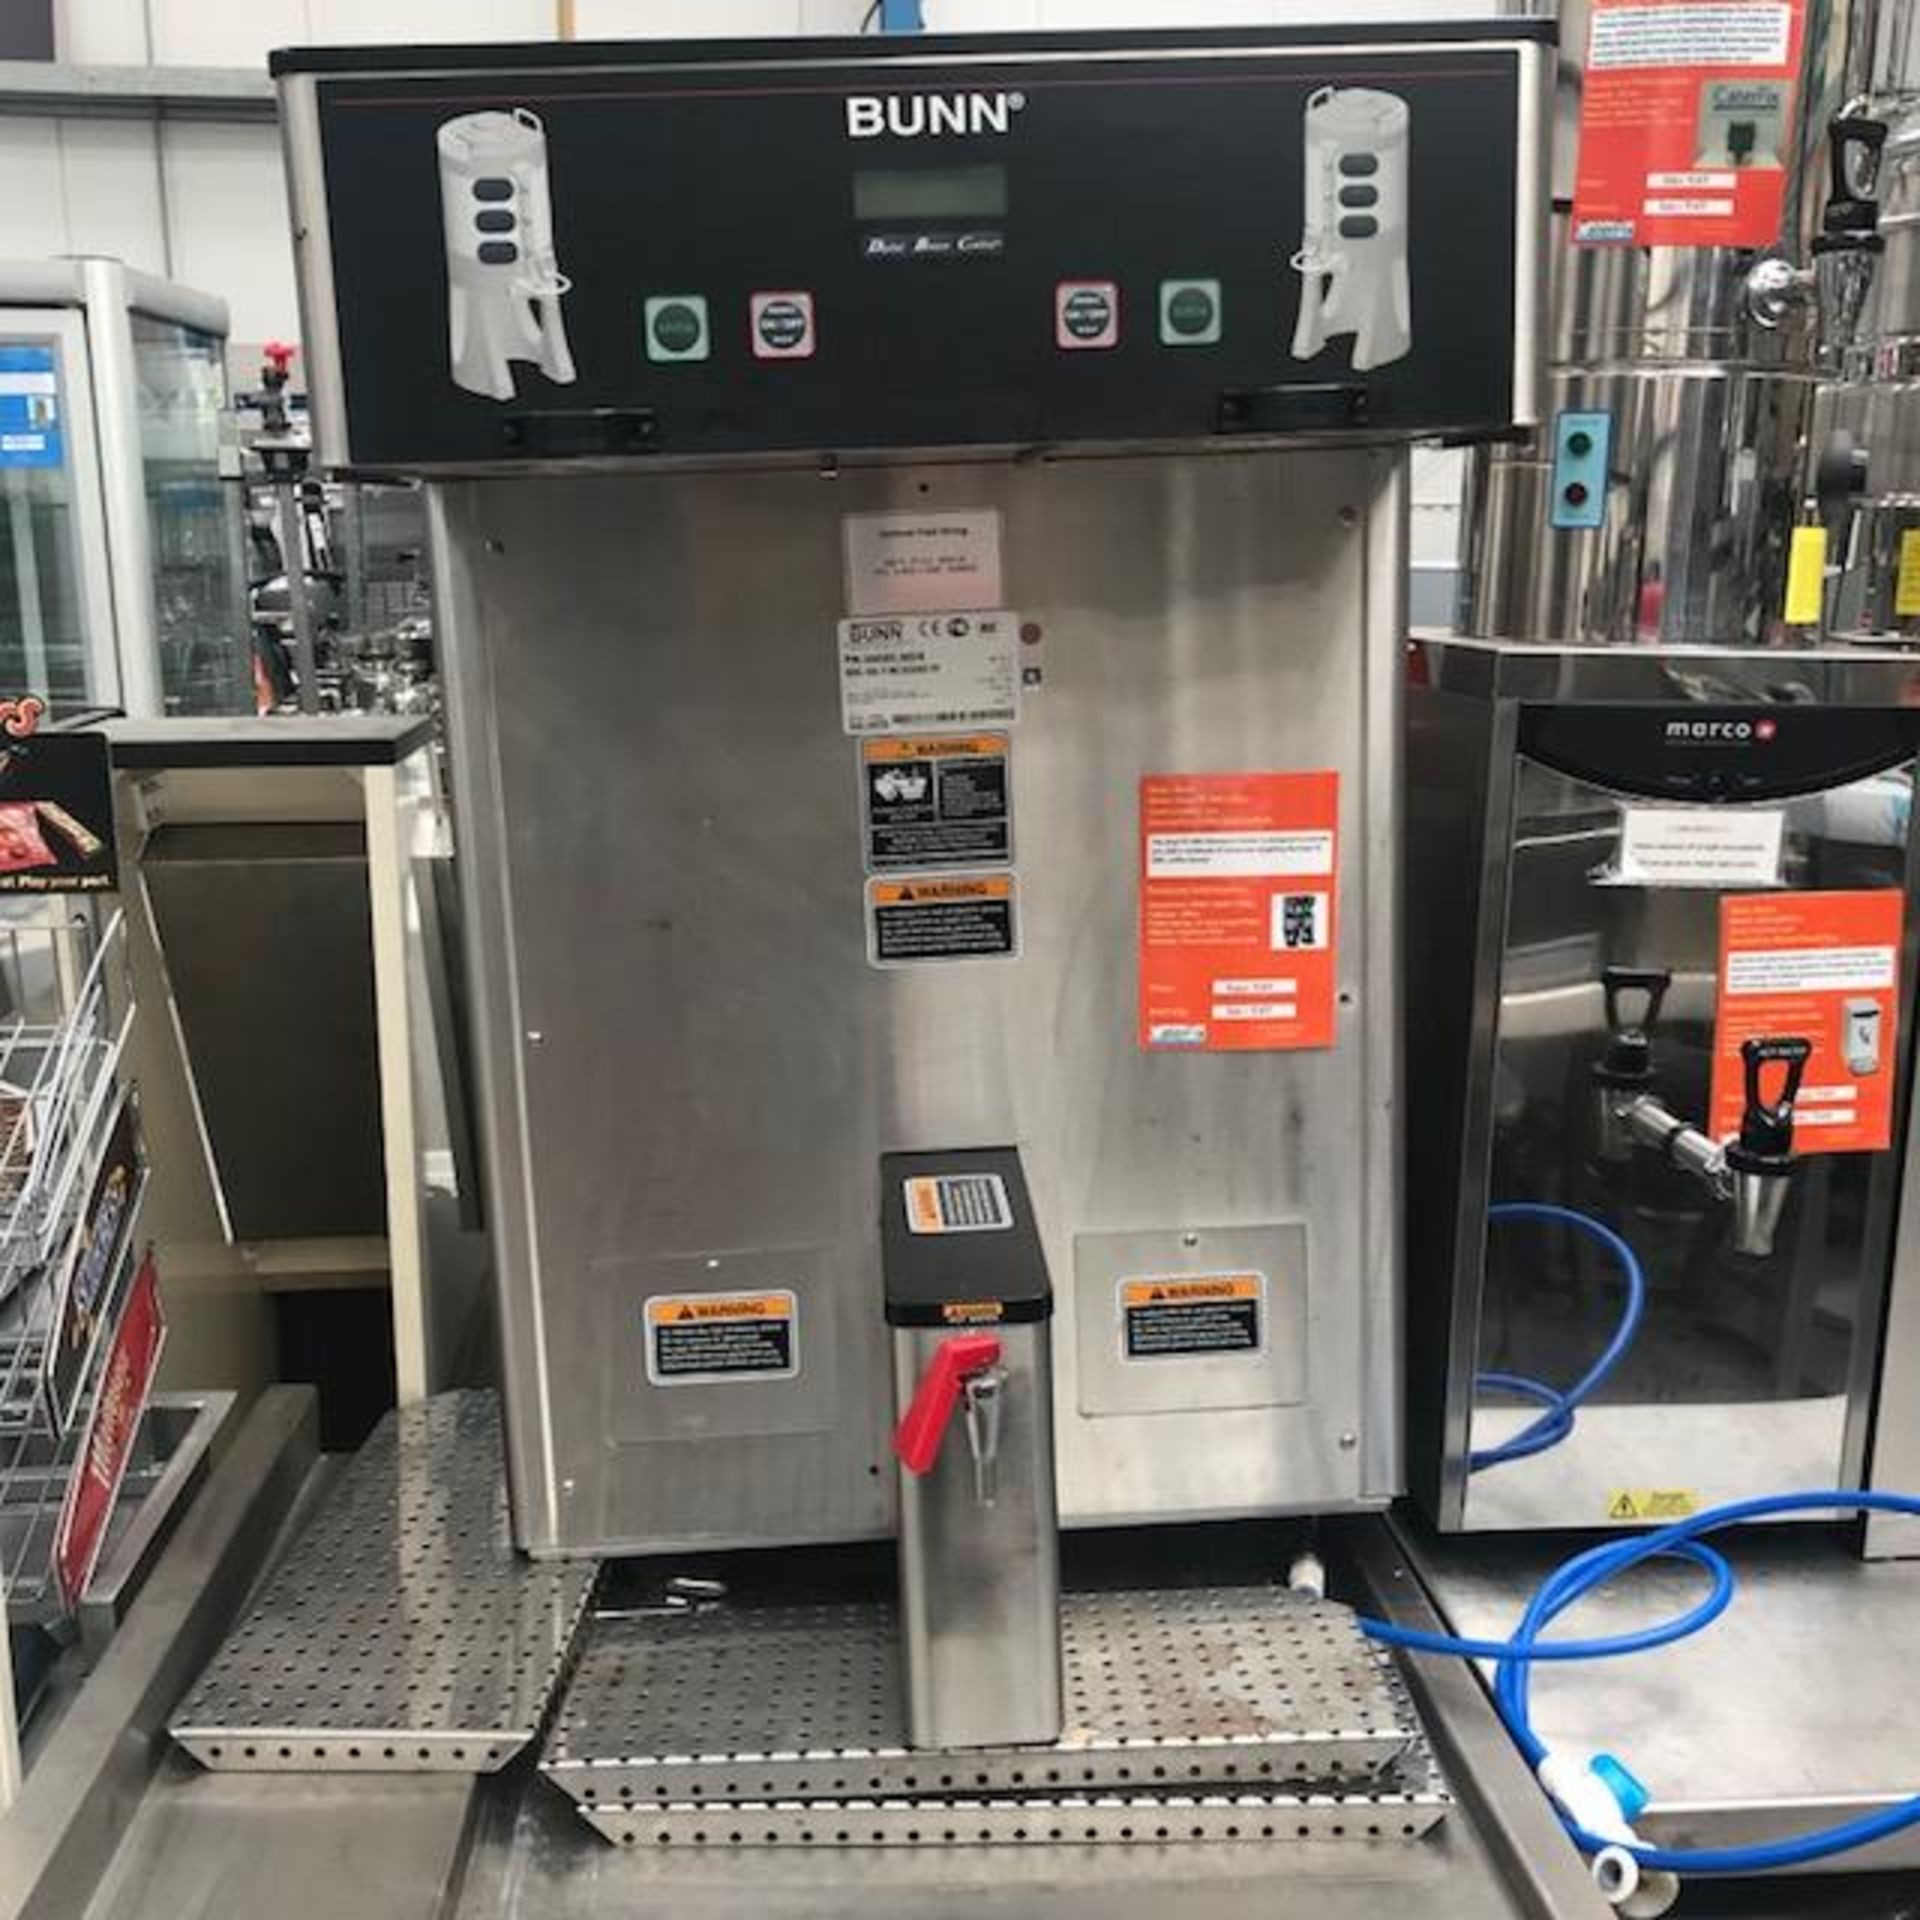 Bunn Dual TF DBC CE230 Coffee brew system The Dual TF DBC Resource Centre is designed to provide you